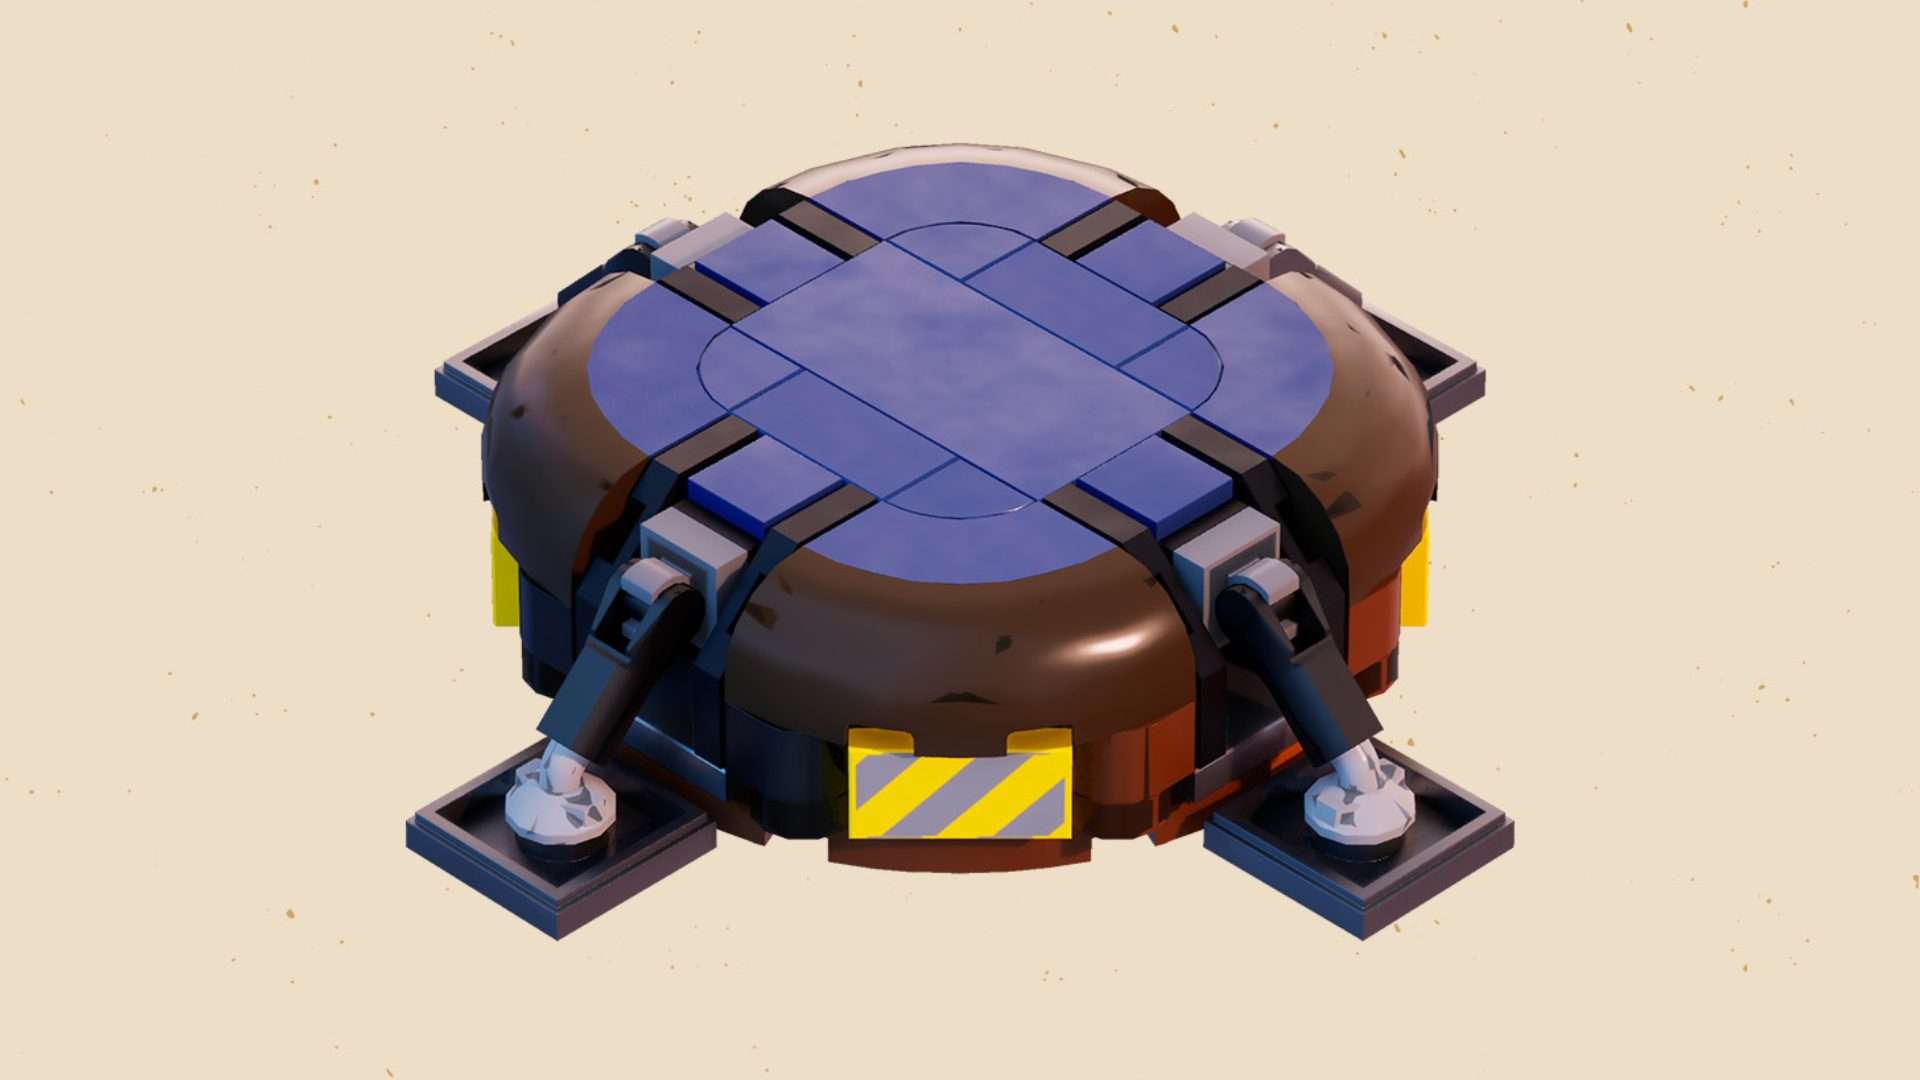 LEGO Fortnite Building Part of Launch Pad that has been added in Chapter 5 Season 1.